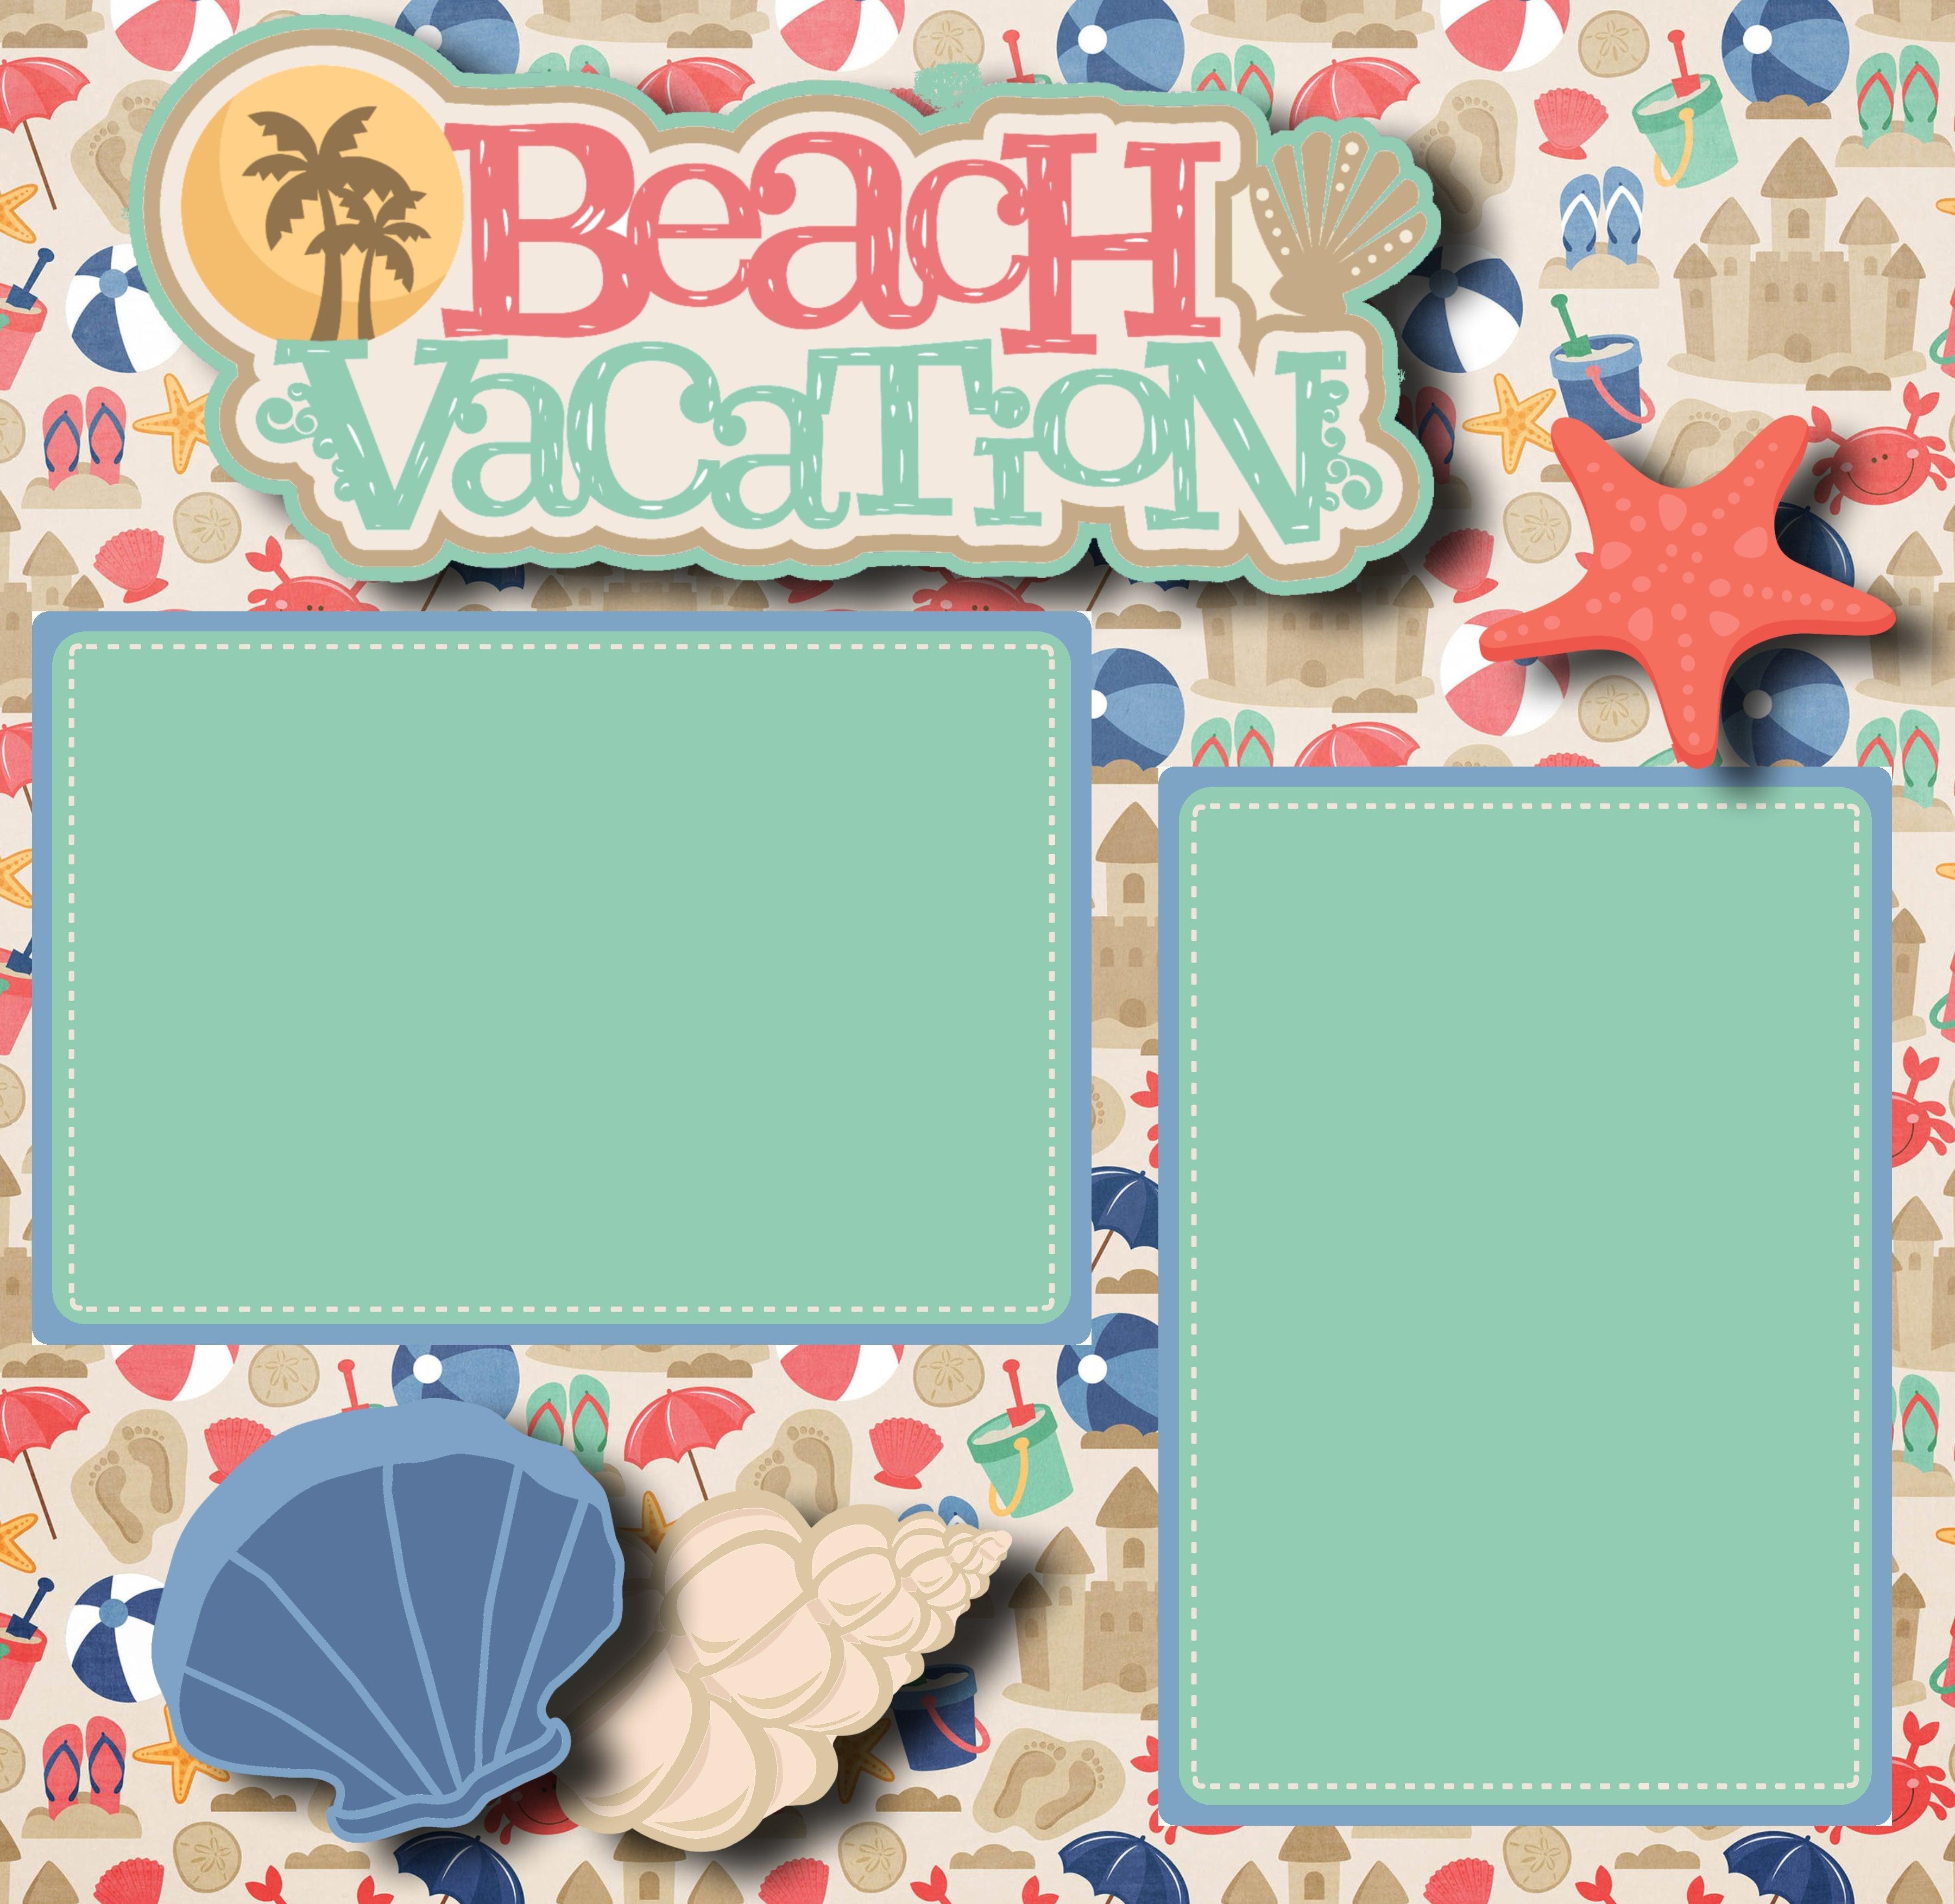 Beach Vacation (2) - 12 x 12 Premade, Printed Scrapbook Pages by SSC Designs - Scrapbook Supply Companies